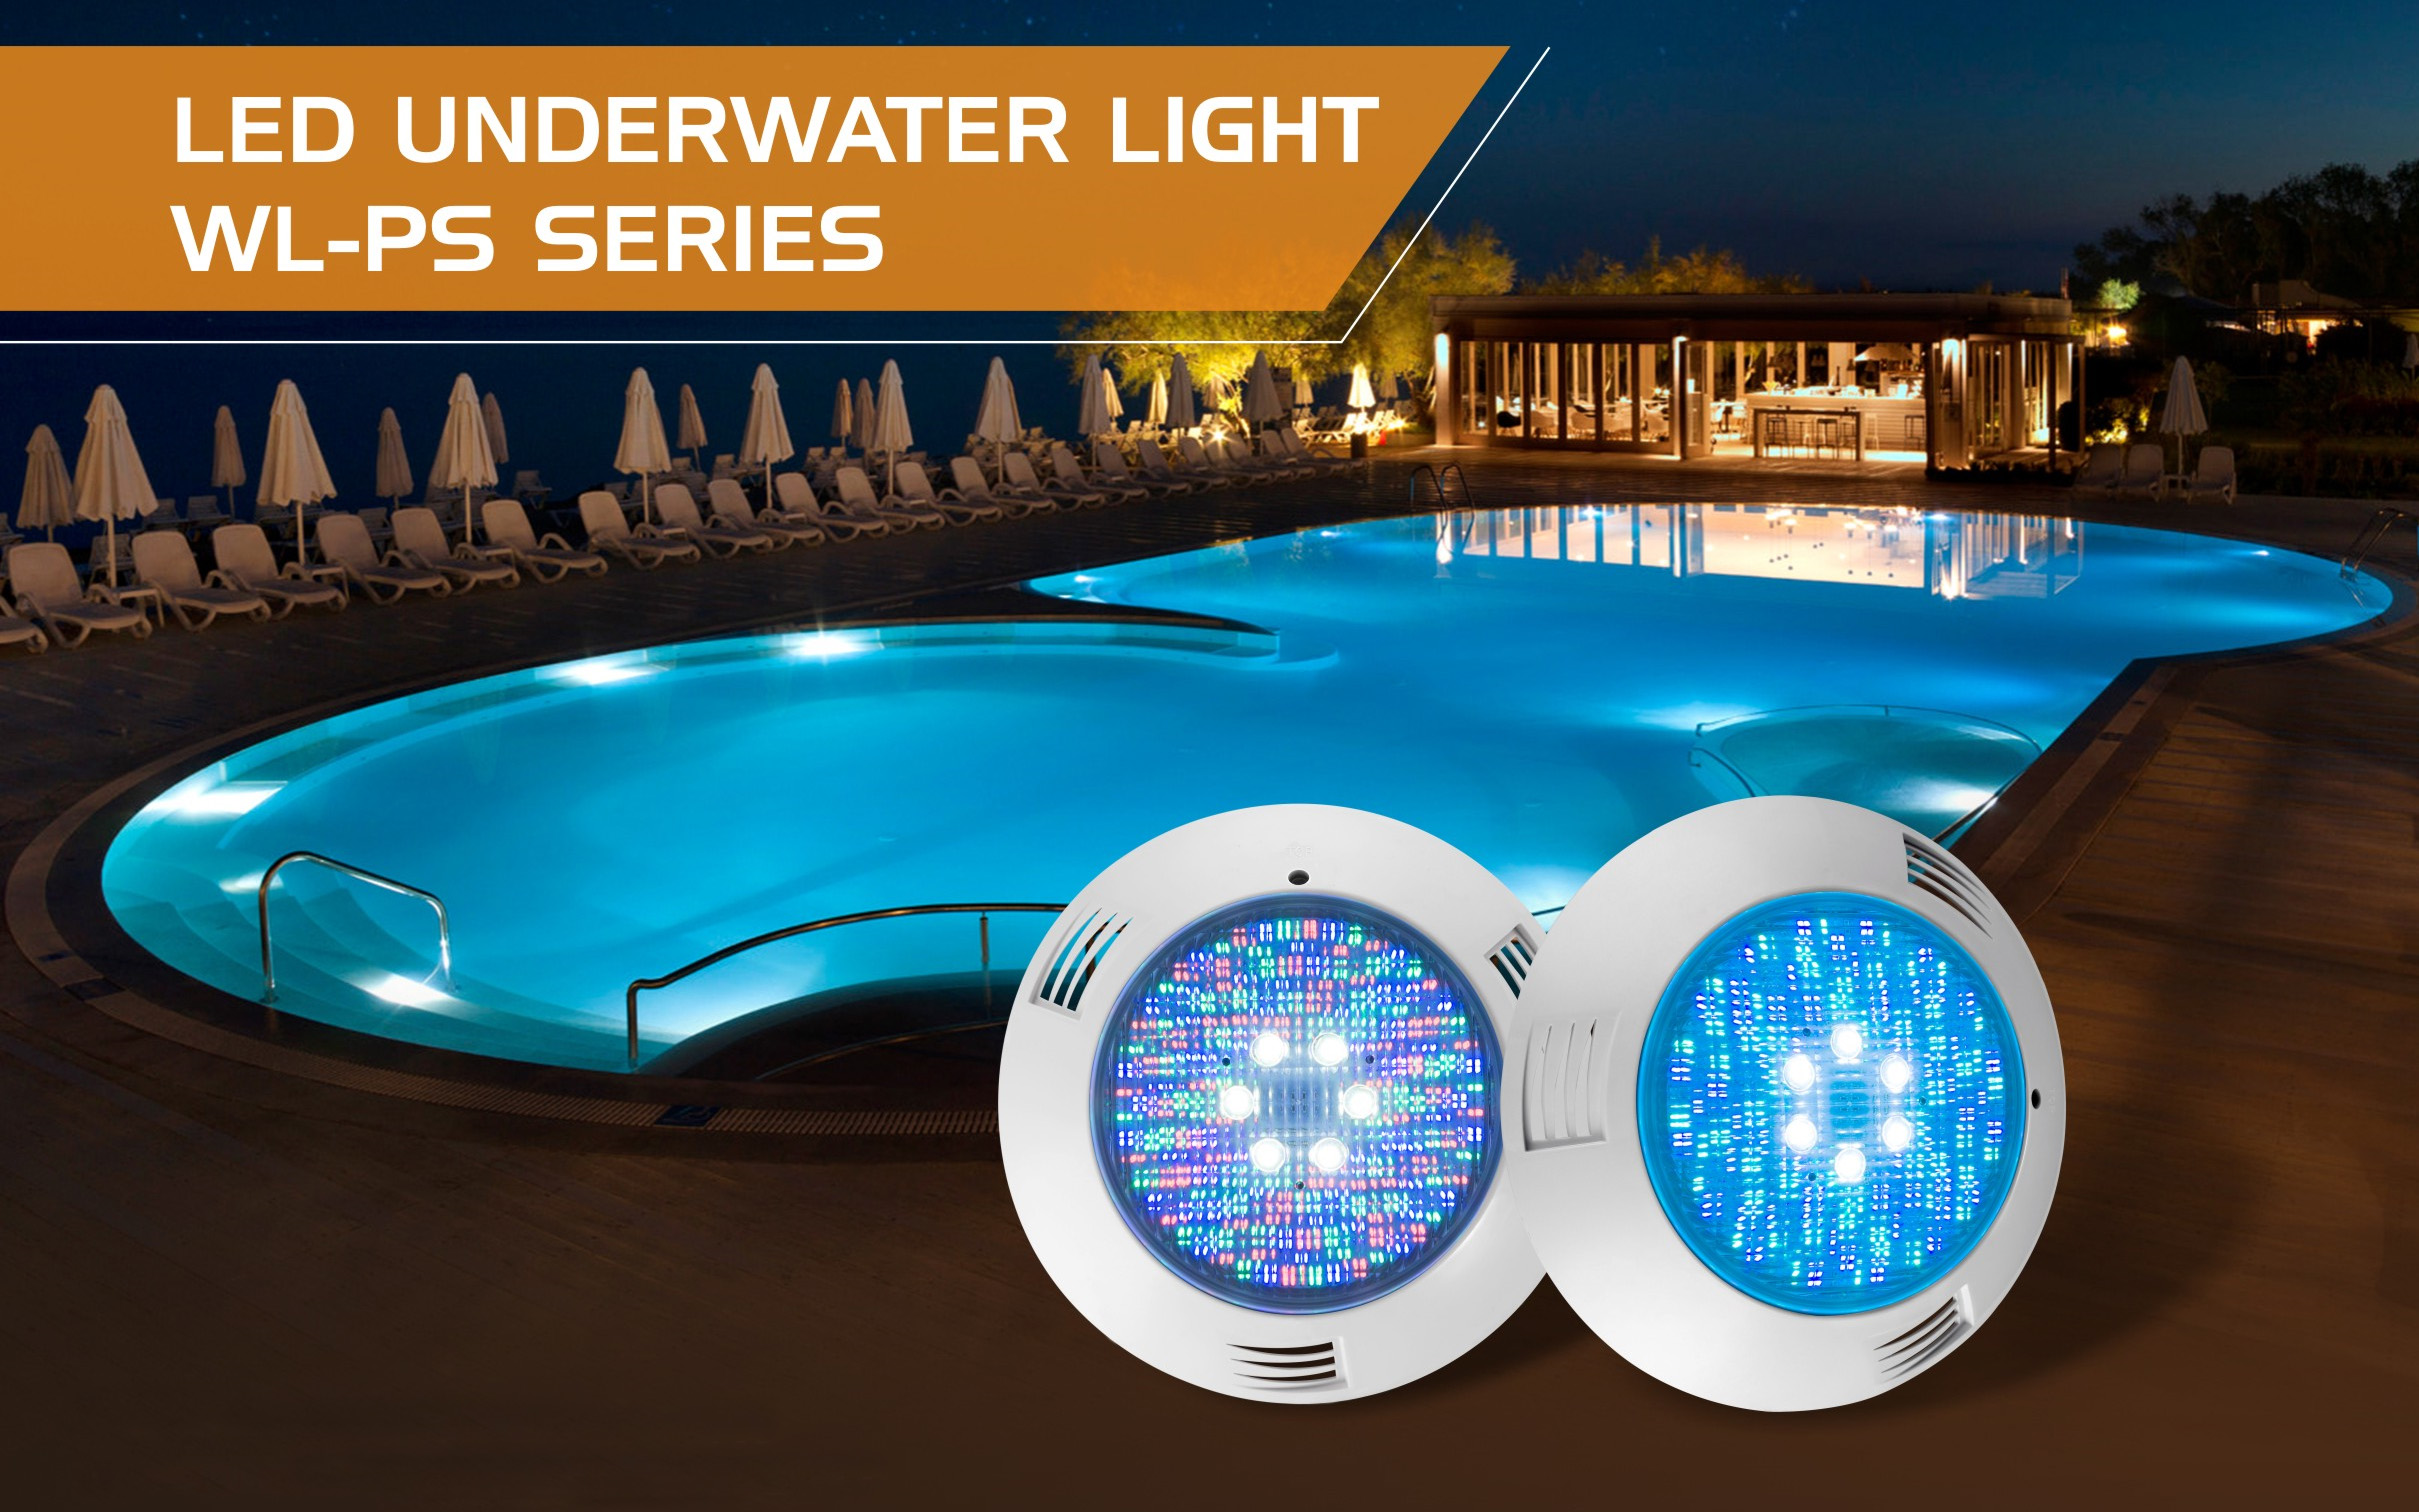 New Designed Swimming Pool Light with 18W SMD LED Light+6W High Power LED Light.